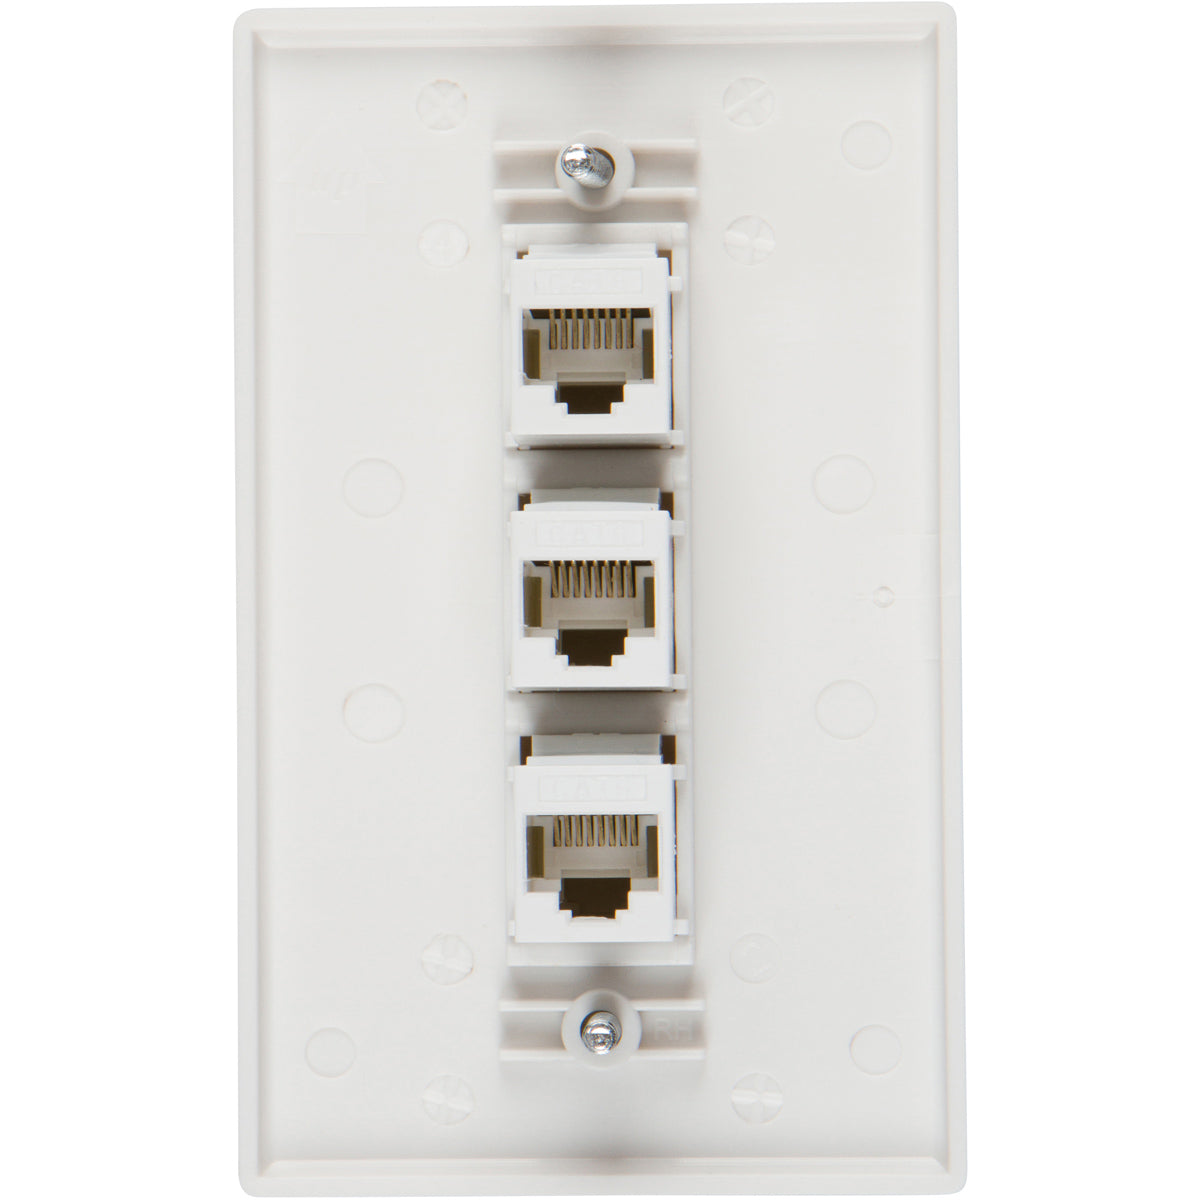 3 Port Cat6 Wall Plate, Female-Female White with Single Gang Low Voltage Mounting Bracket Device (3 Port) - Milena International Inc